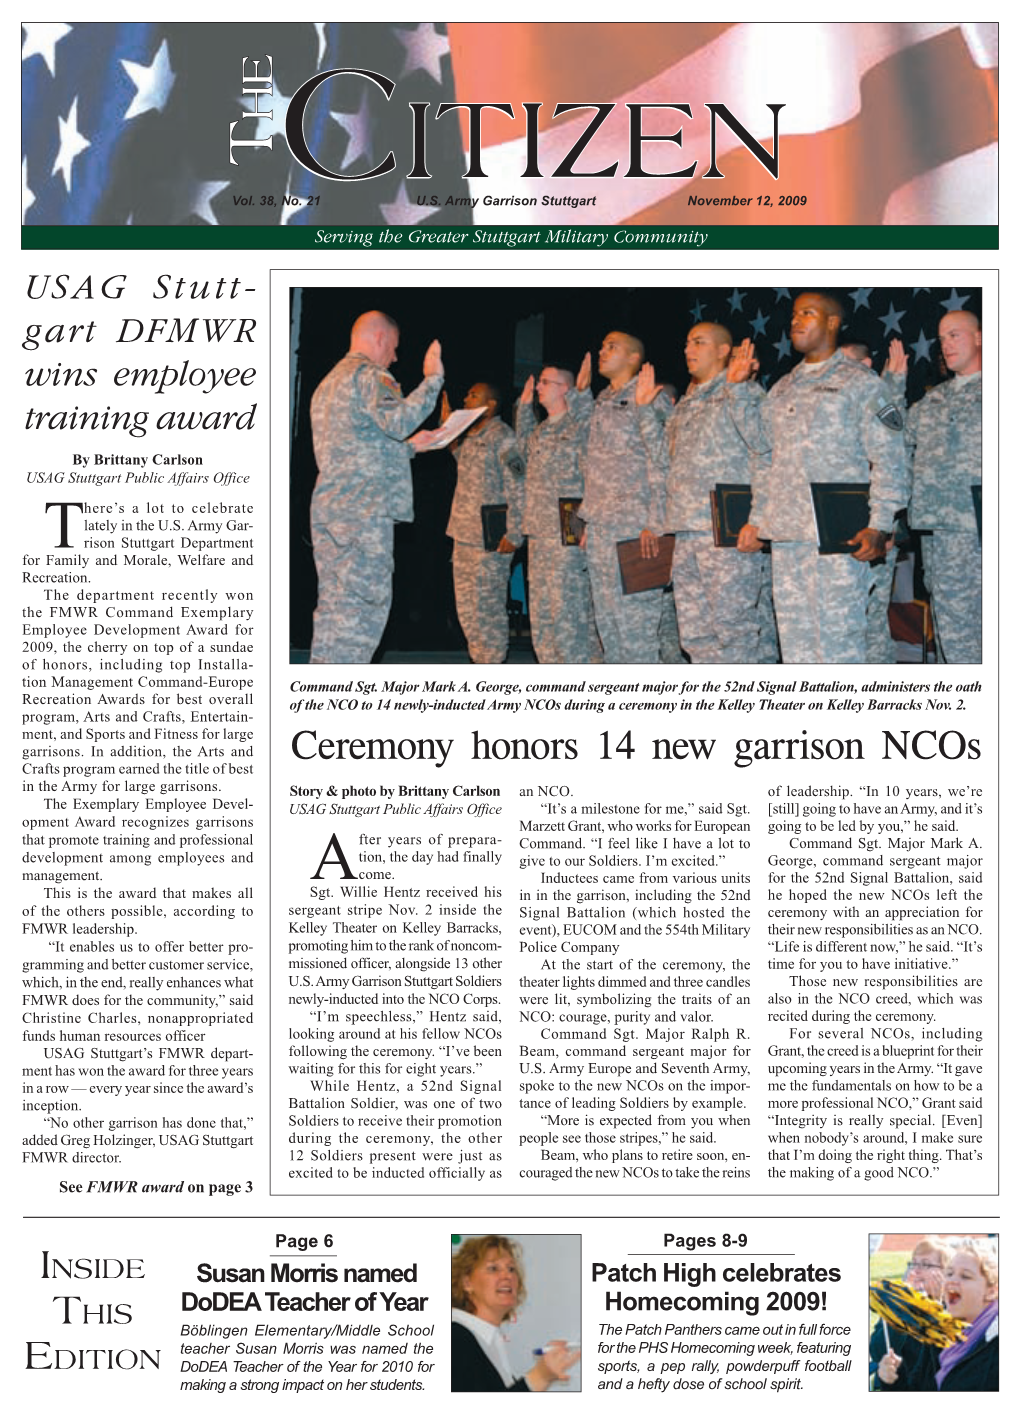 Ceremony Honors 14 New Garrison Ncos Crafts Program Earned the Title of Best in the Army for Large Garrisons